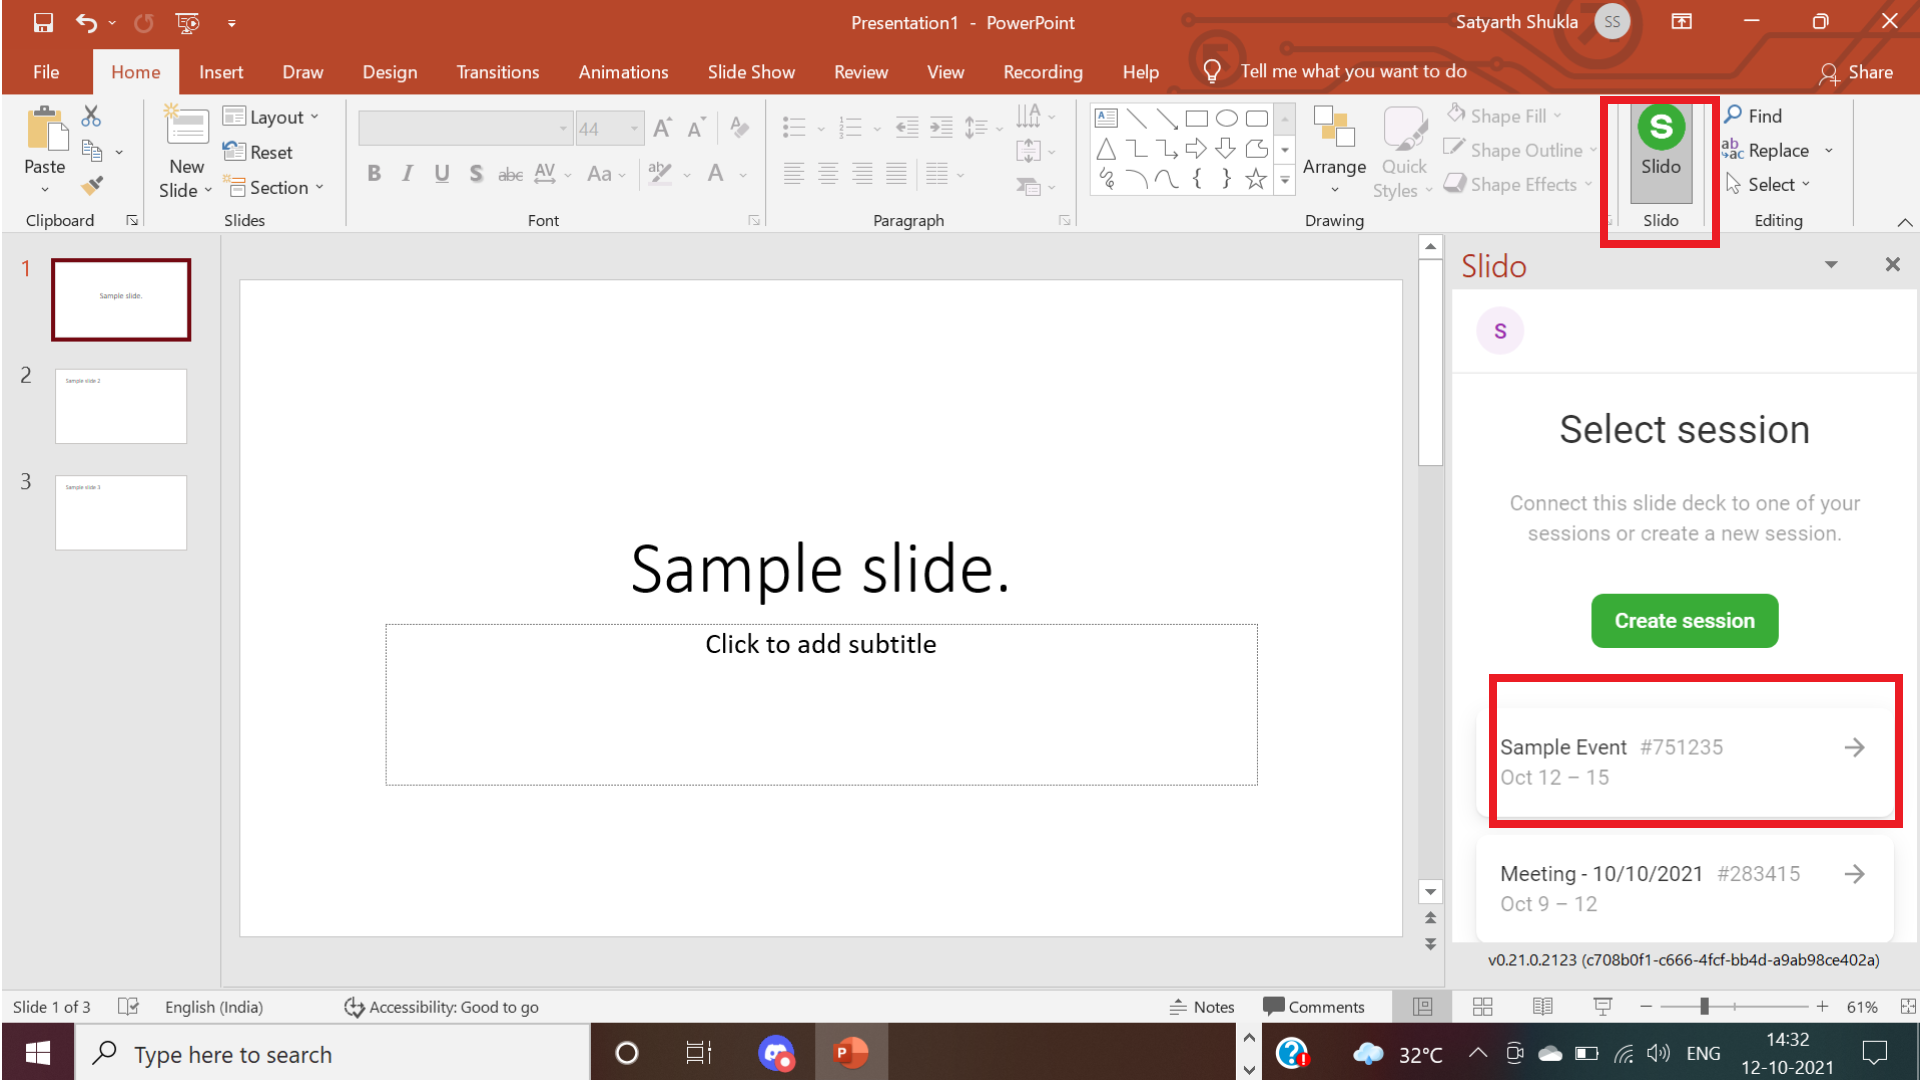 How to use Slido in PowerPoint?